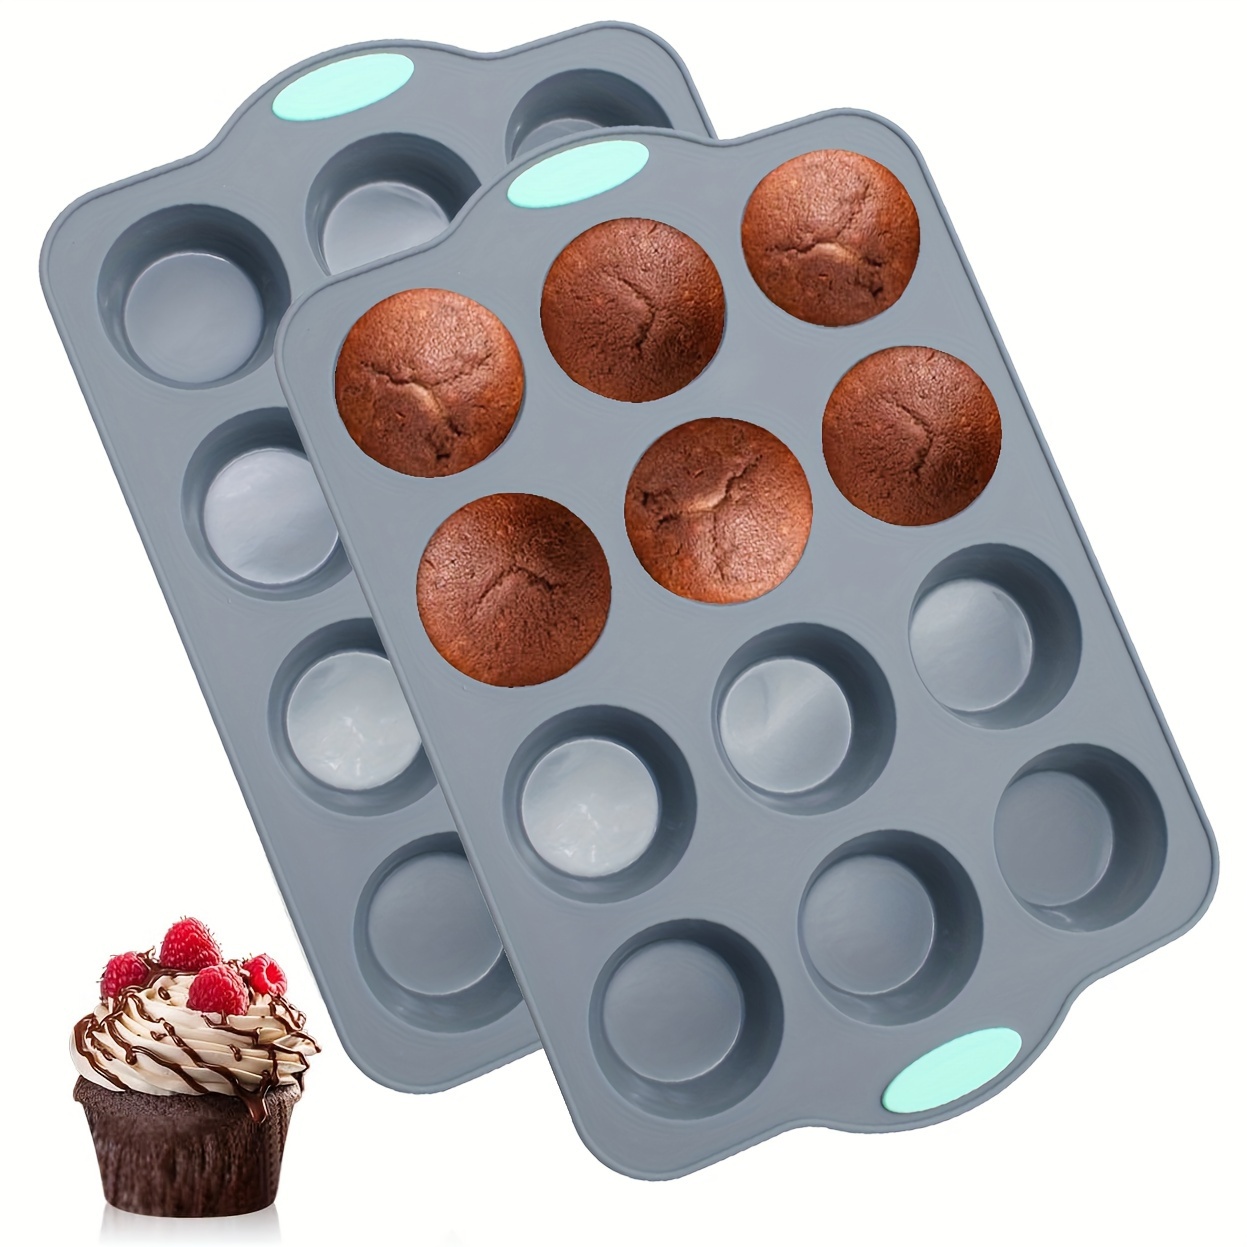 

2 Pack 12-cup Pan, Nonstick Baking Cups, Chocolate Muffin, Cupcake, Egg Tart, Fruint Pie, Brownie, Bpa Free Cupcake Pan With Metal Reinforced Frame More Strength